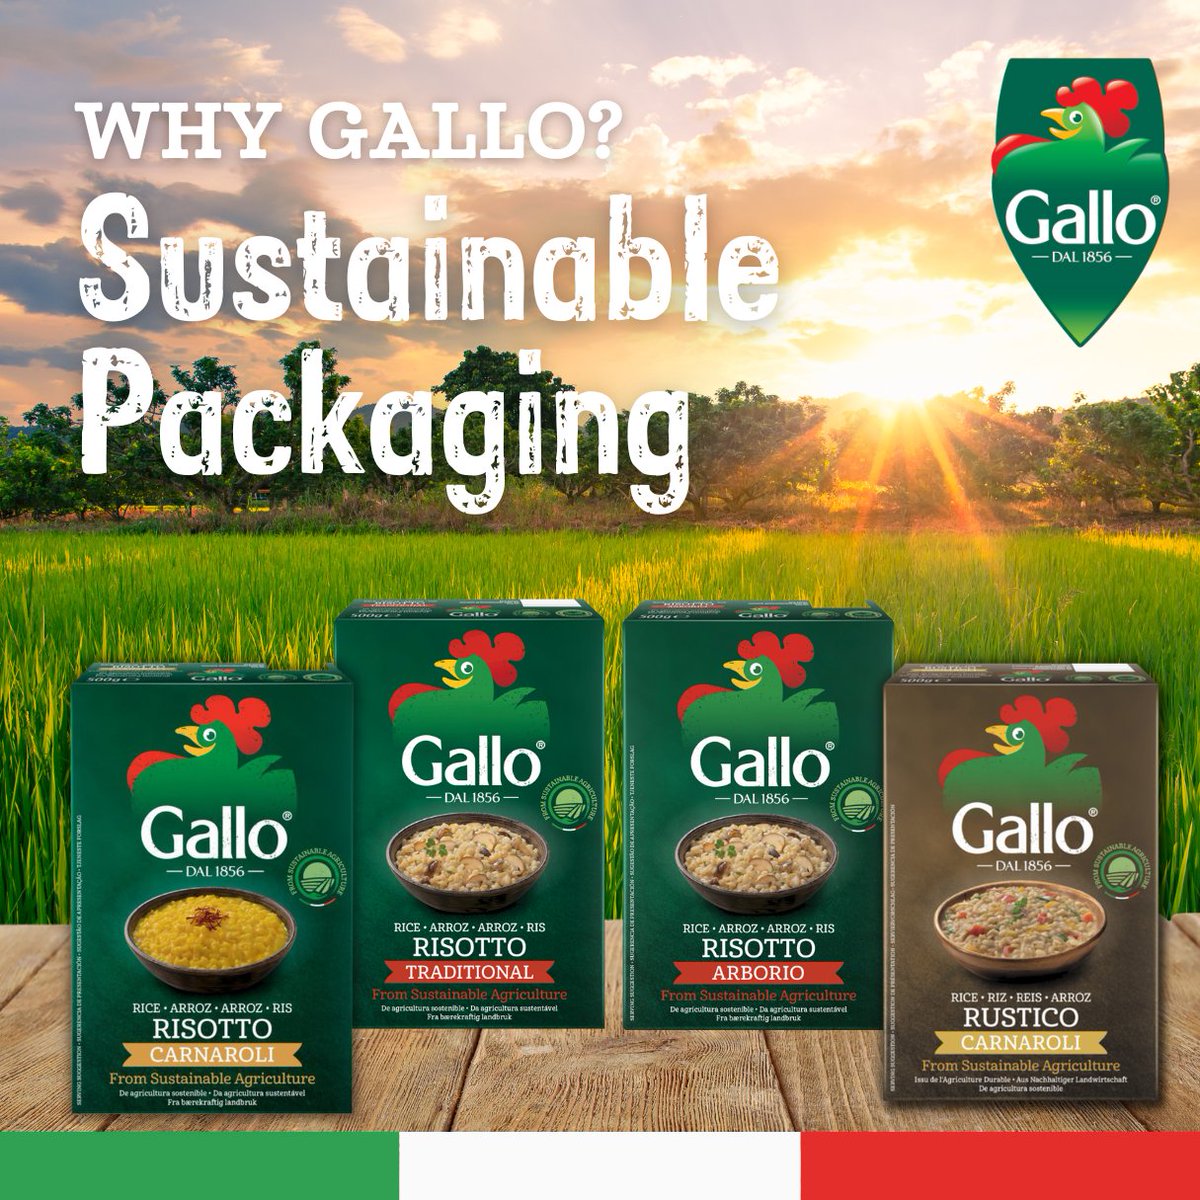 The Gallo Risotto Traditional, Arborio, Carnaroli, and the Carnaroli Rustico are now in packs using FSC certified cardboard outer to protect the grains. #risotto #risottorice #sustainablerice #sustainablebrand #sustainability #RisoGallo